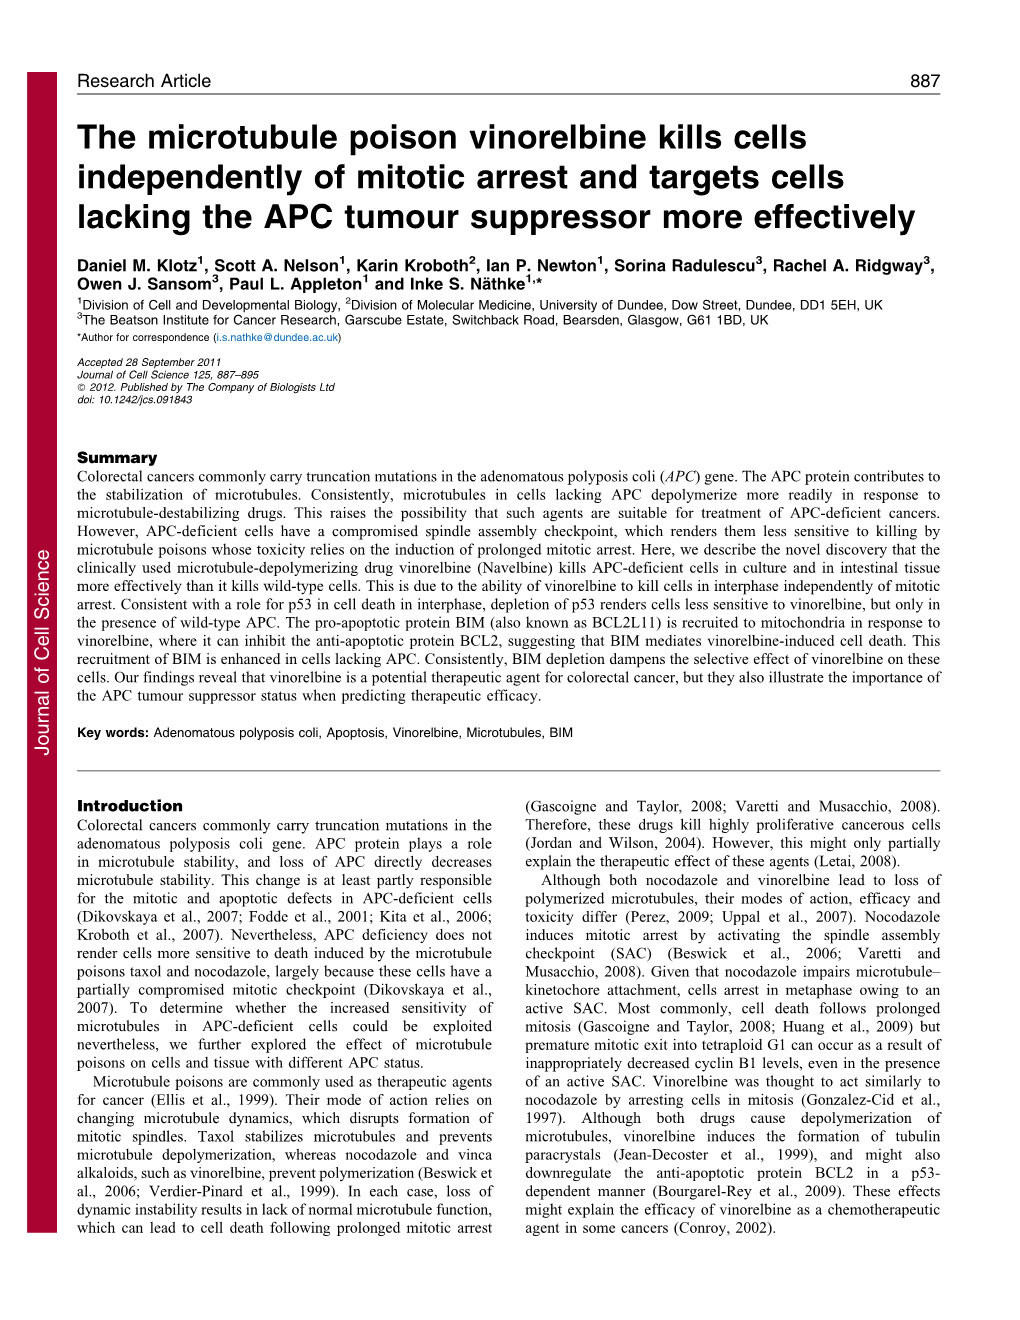 The Microtubule Poison Vinorelbine Kills Cells Independently of Mitotic Arrest and Targets Cells Lacking the APC Tumour Suppressor More Effectively